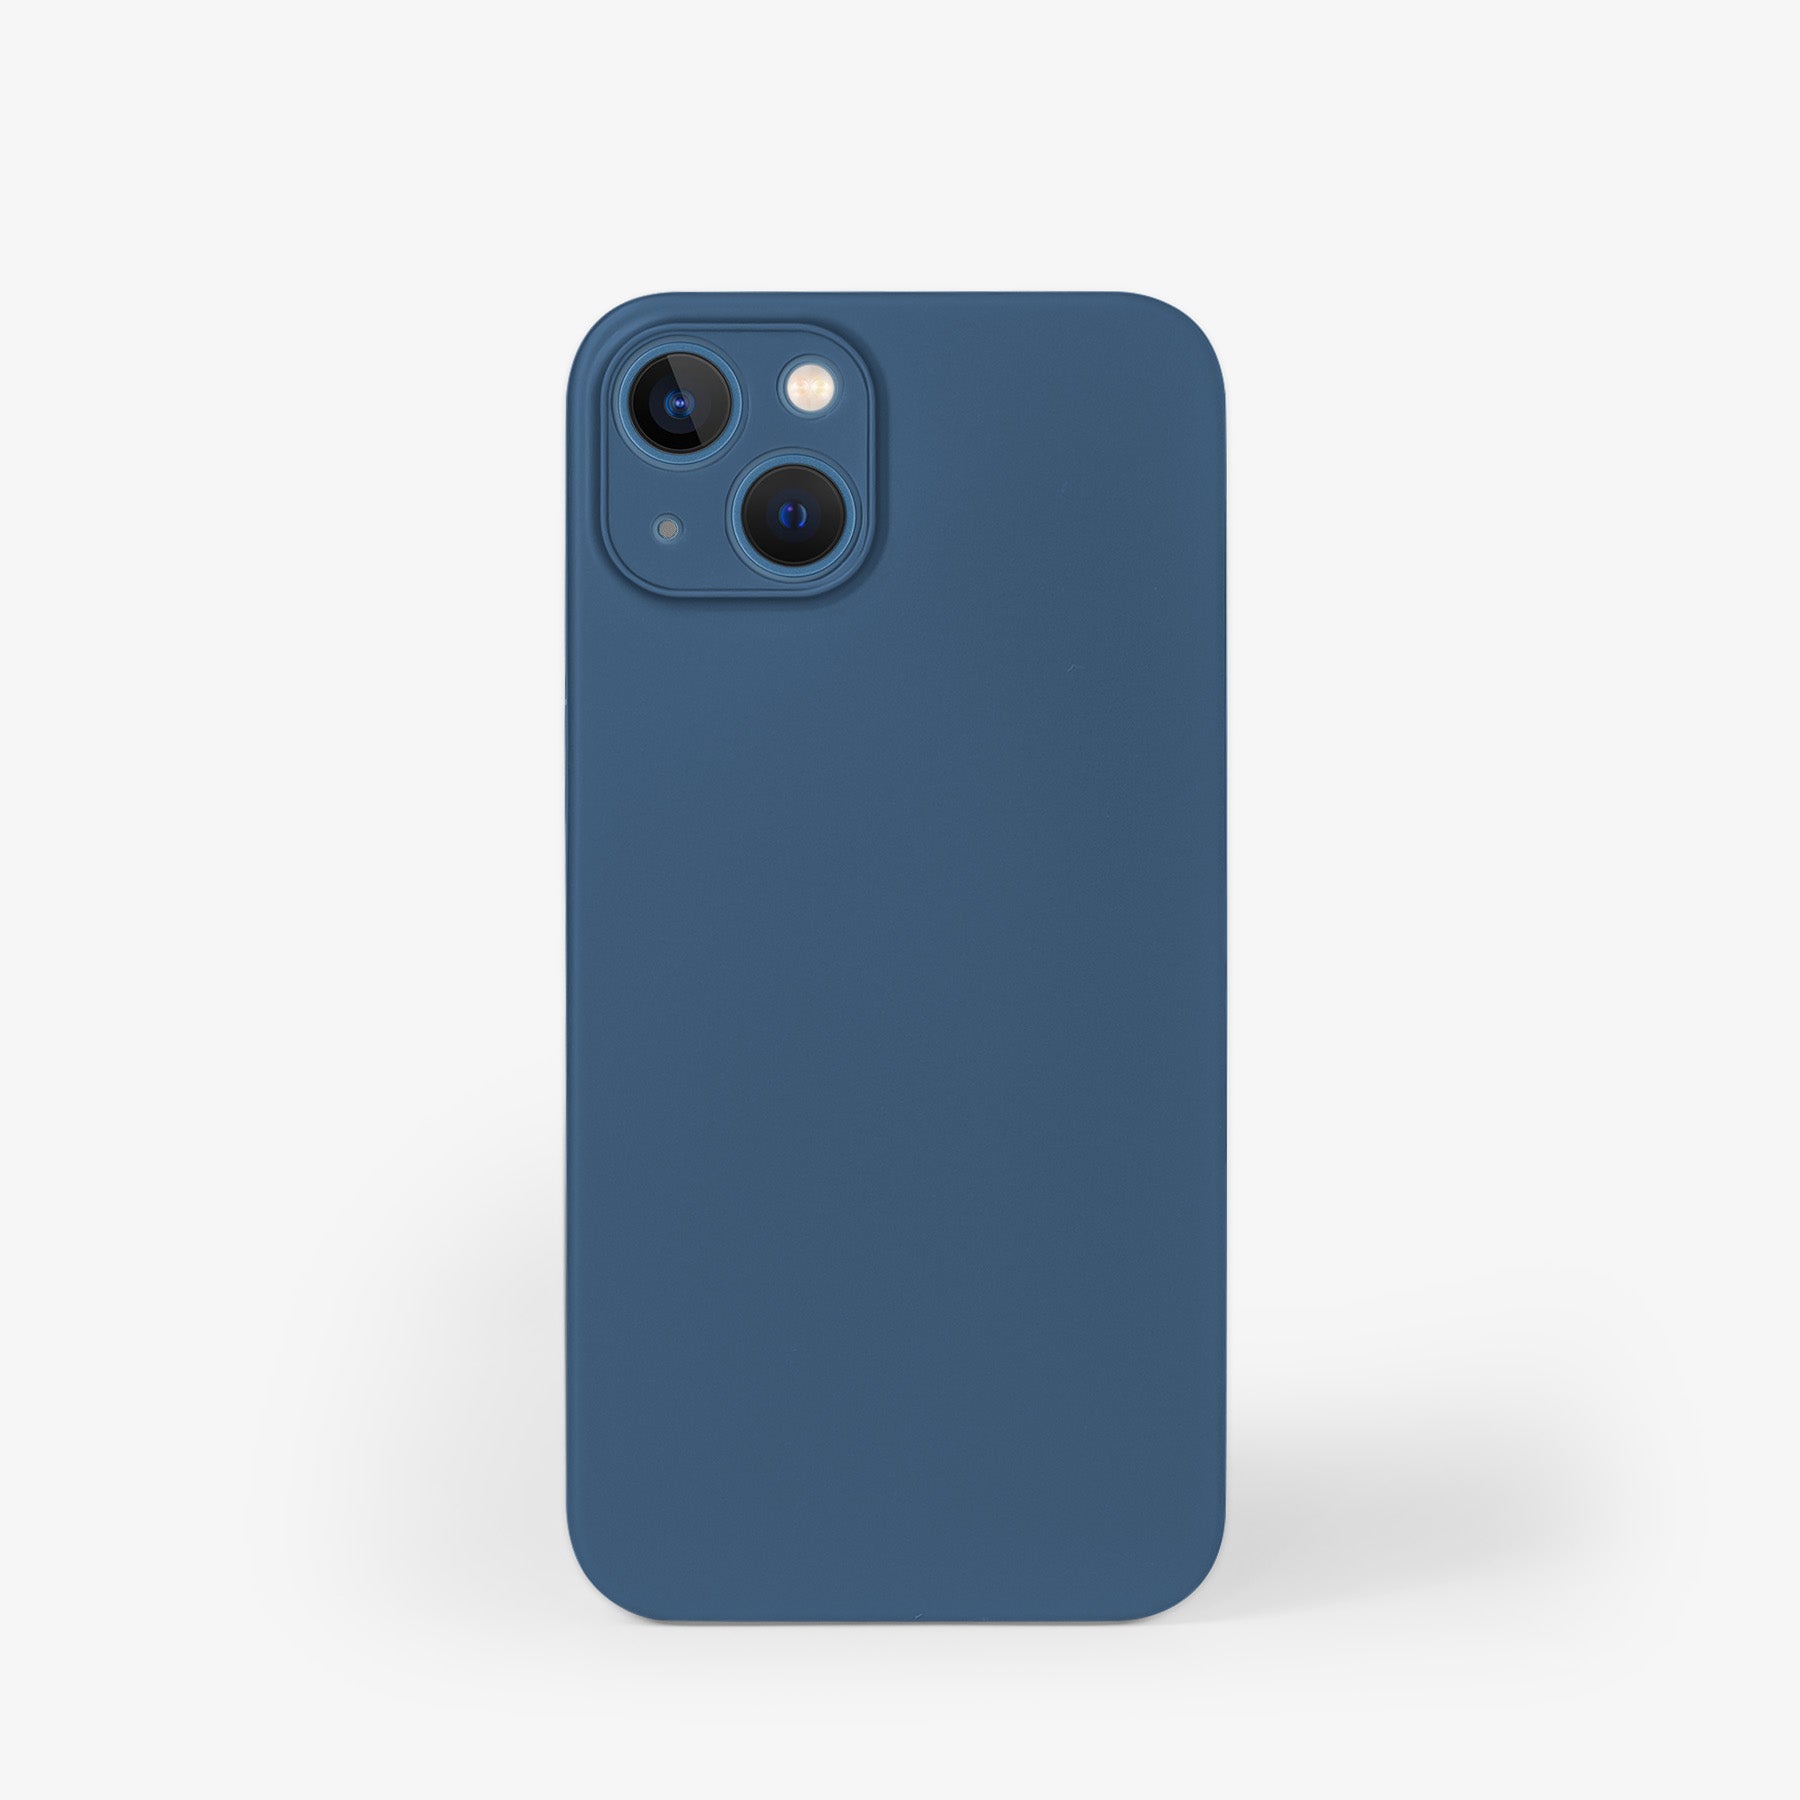 totallee Thin iPhone 12 Pro Max Case | Pacific Blue